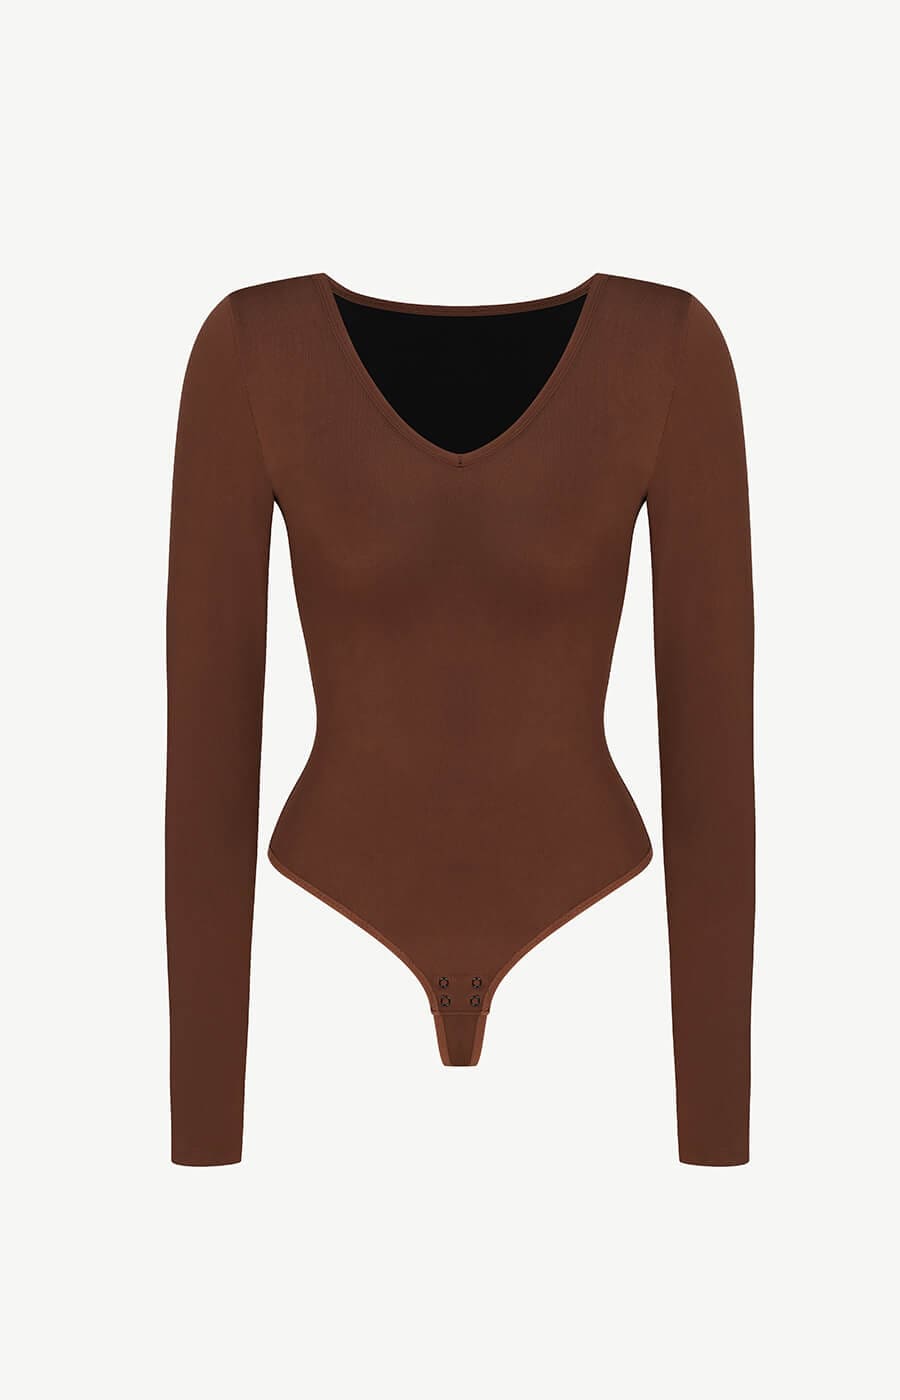 Bodysuit…with a thong option.